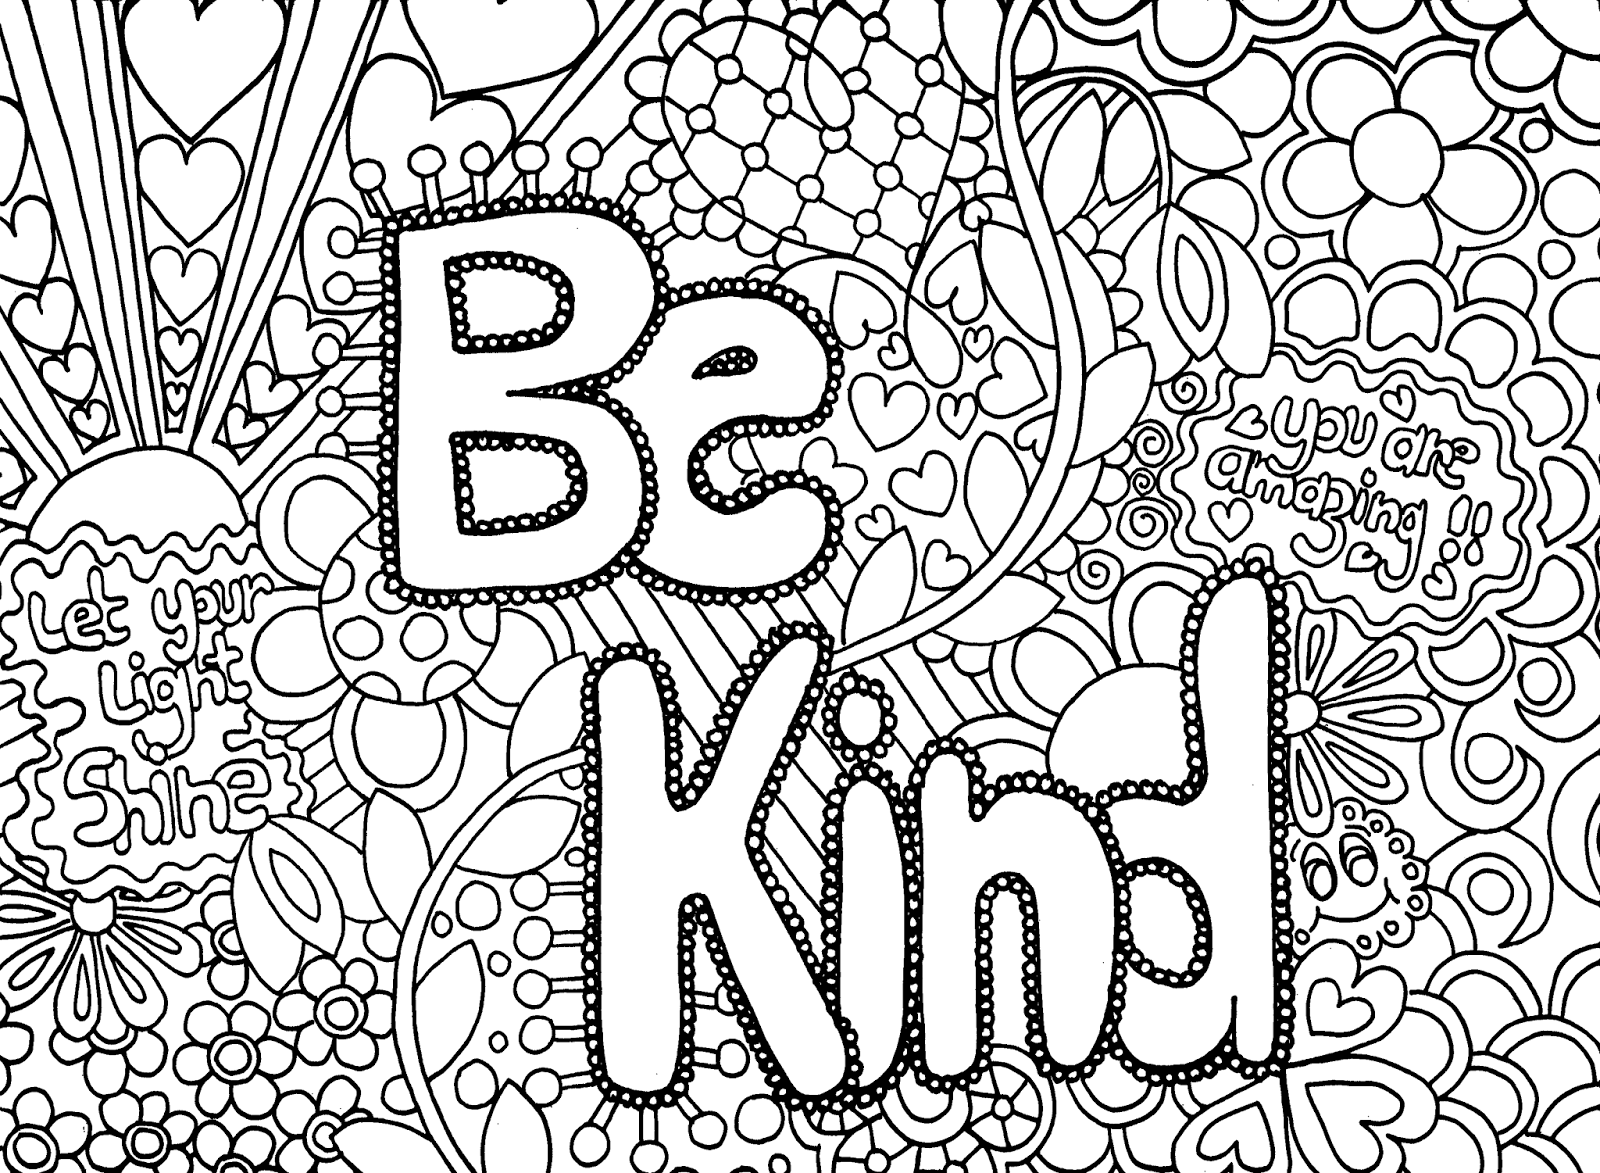 teenager-coloring-page-0003-q1